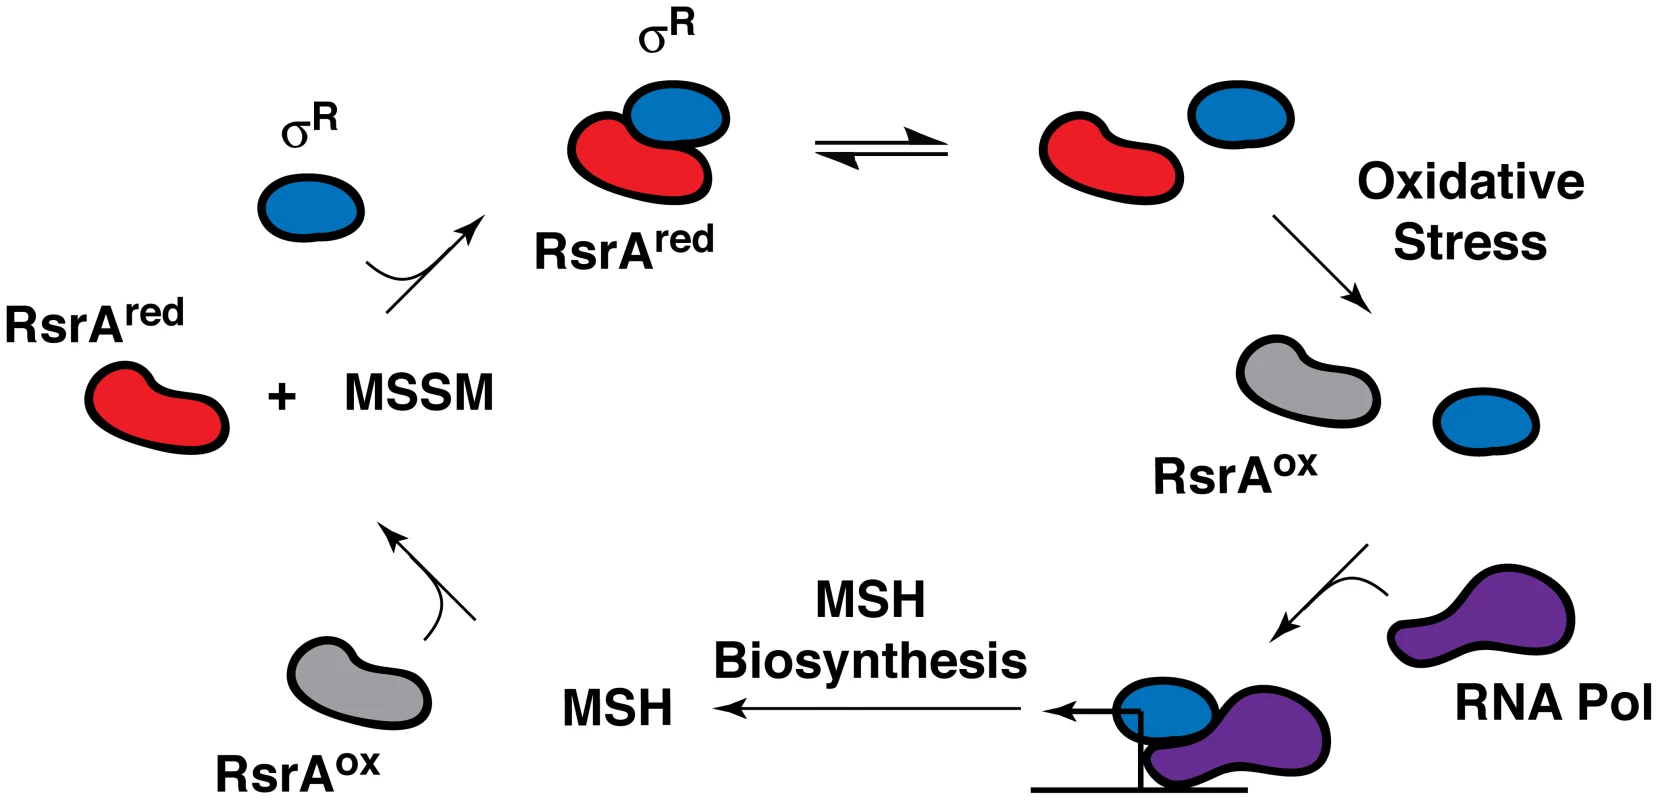 Feedback regulation of RsrA activity and SigR (σ<sup>R</sup>)-mediated transcription by MSH in <i>S. coelicolor</i>.